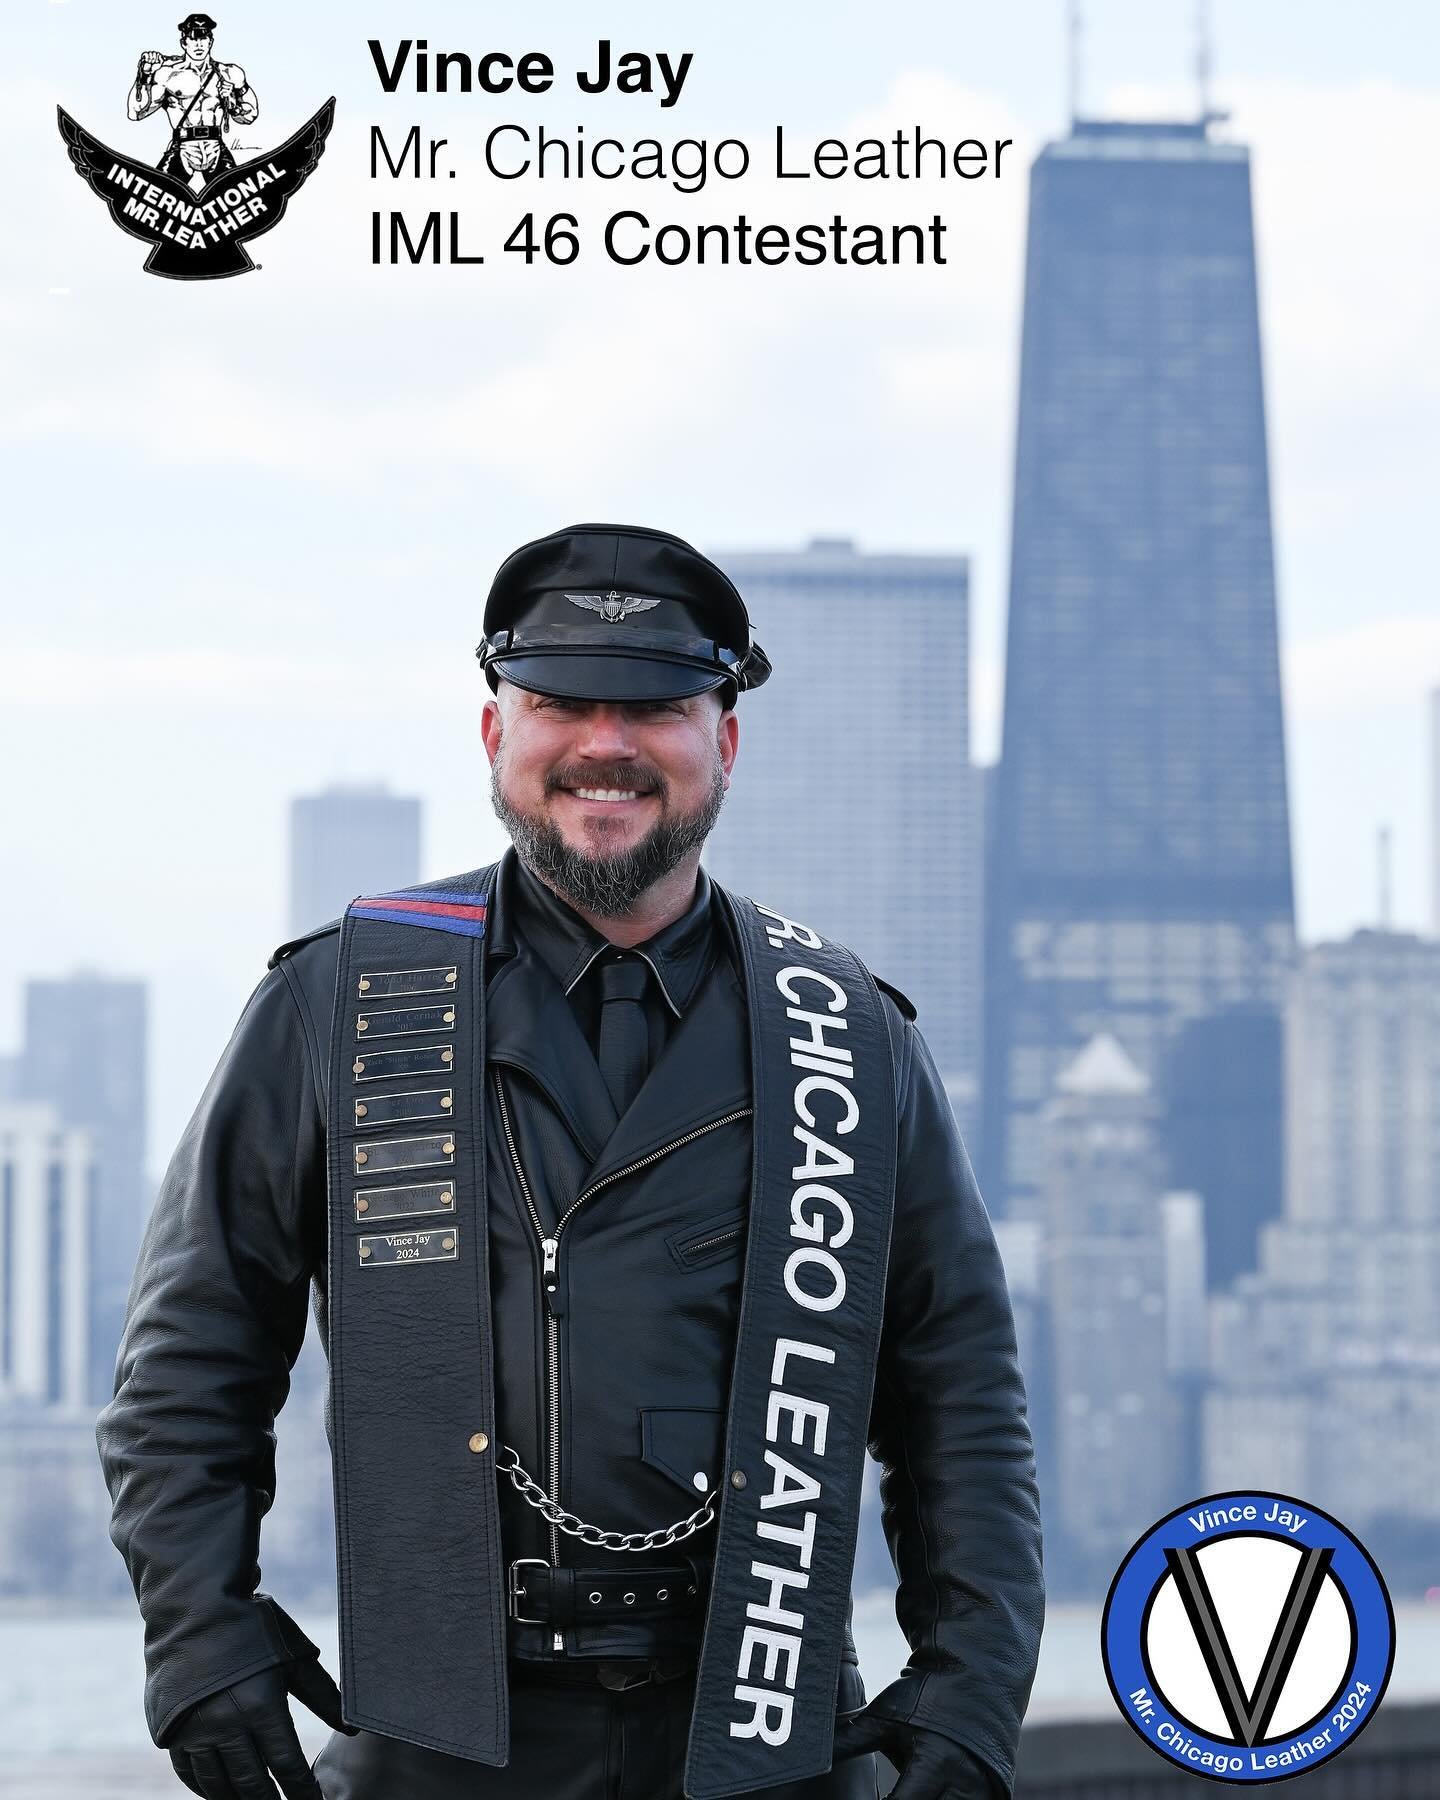 Three weeks from today I will embark on the adventure of a lifetime. Never in my wildest dreams would I have thought I&rsquo;d be representing Chicago as a titleholder, nor competing in a global Leather event like IML. Leather has given me confidence